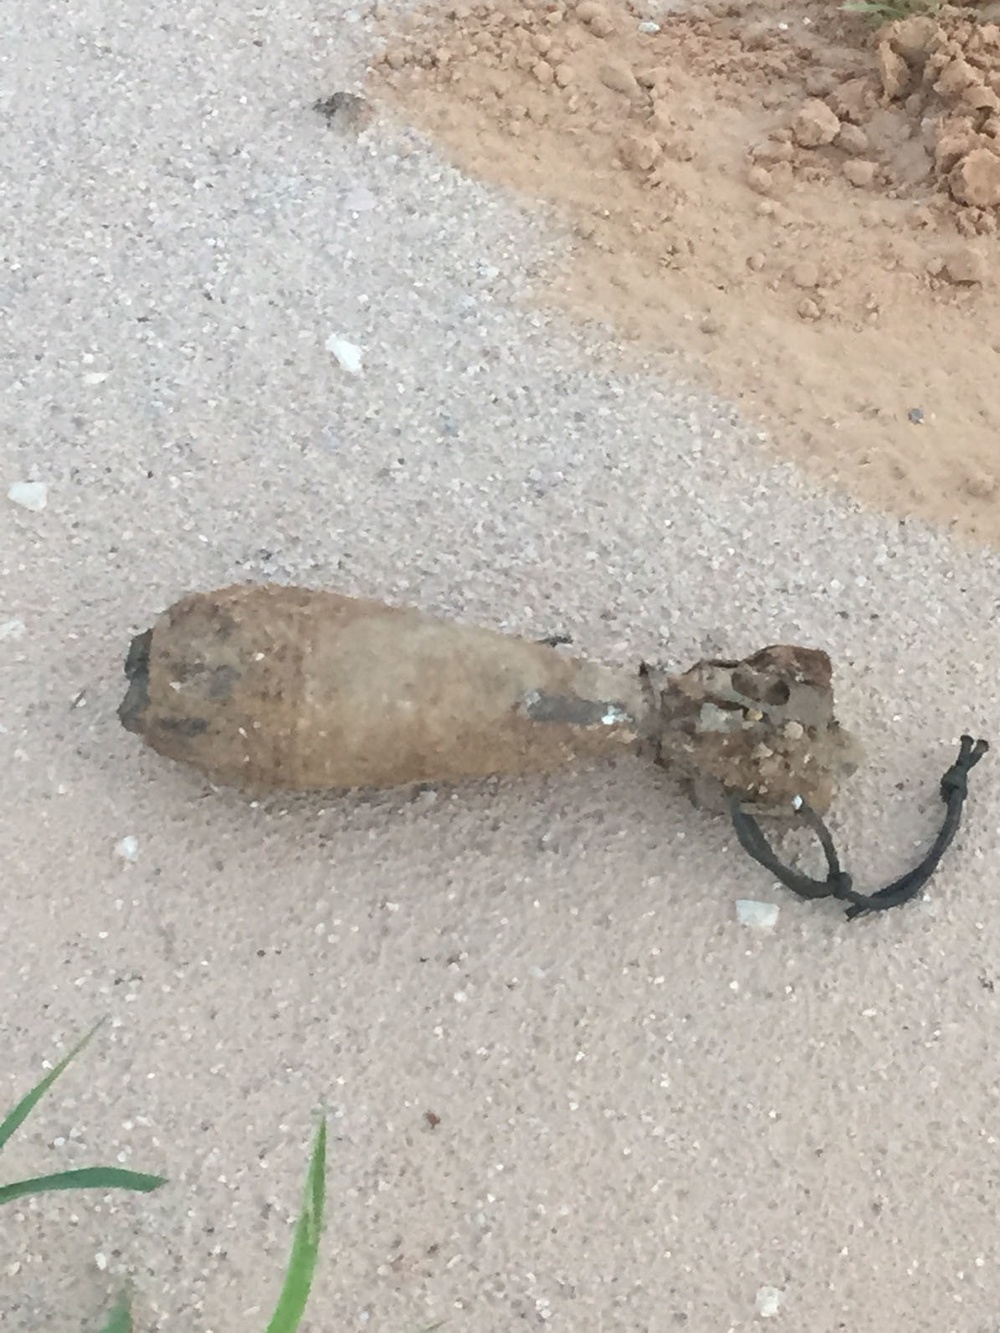 Reserve soldier finds unexploded ordnance during multi-component range road project